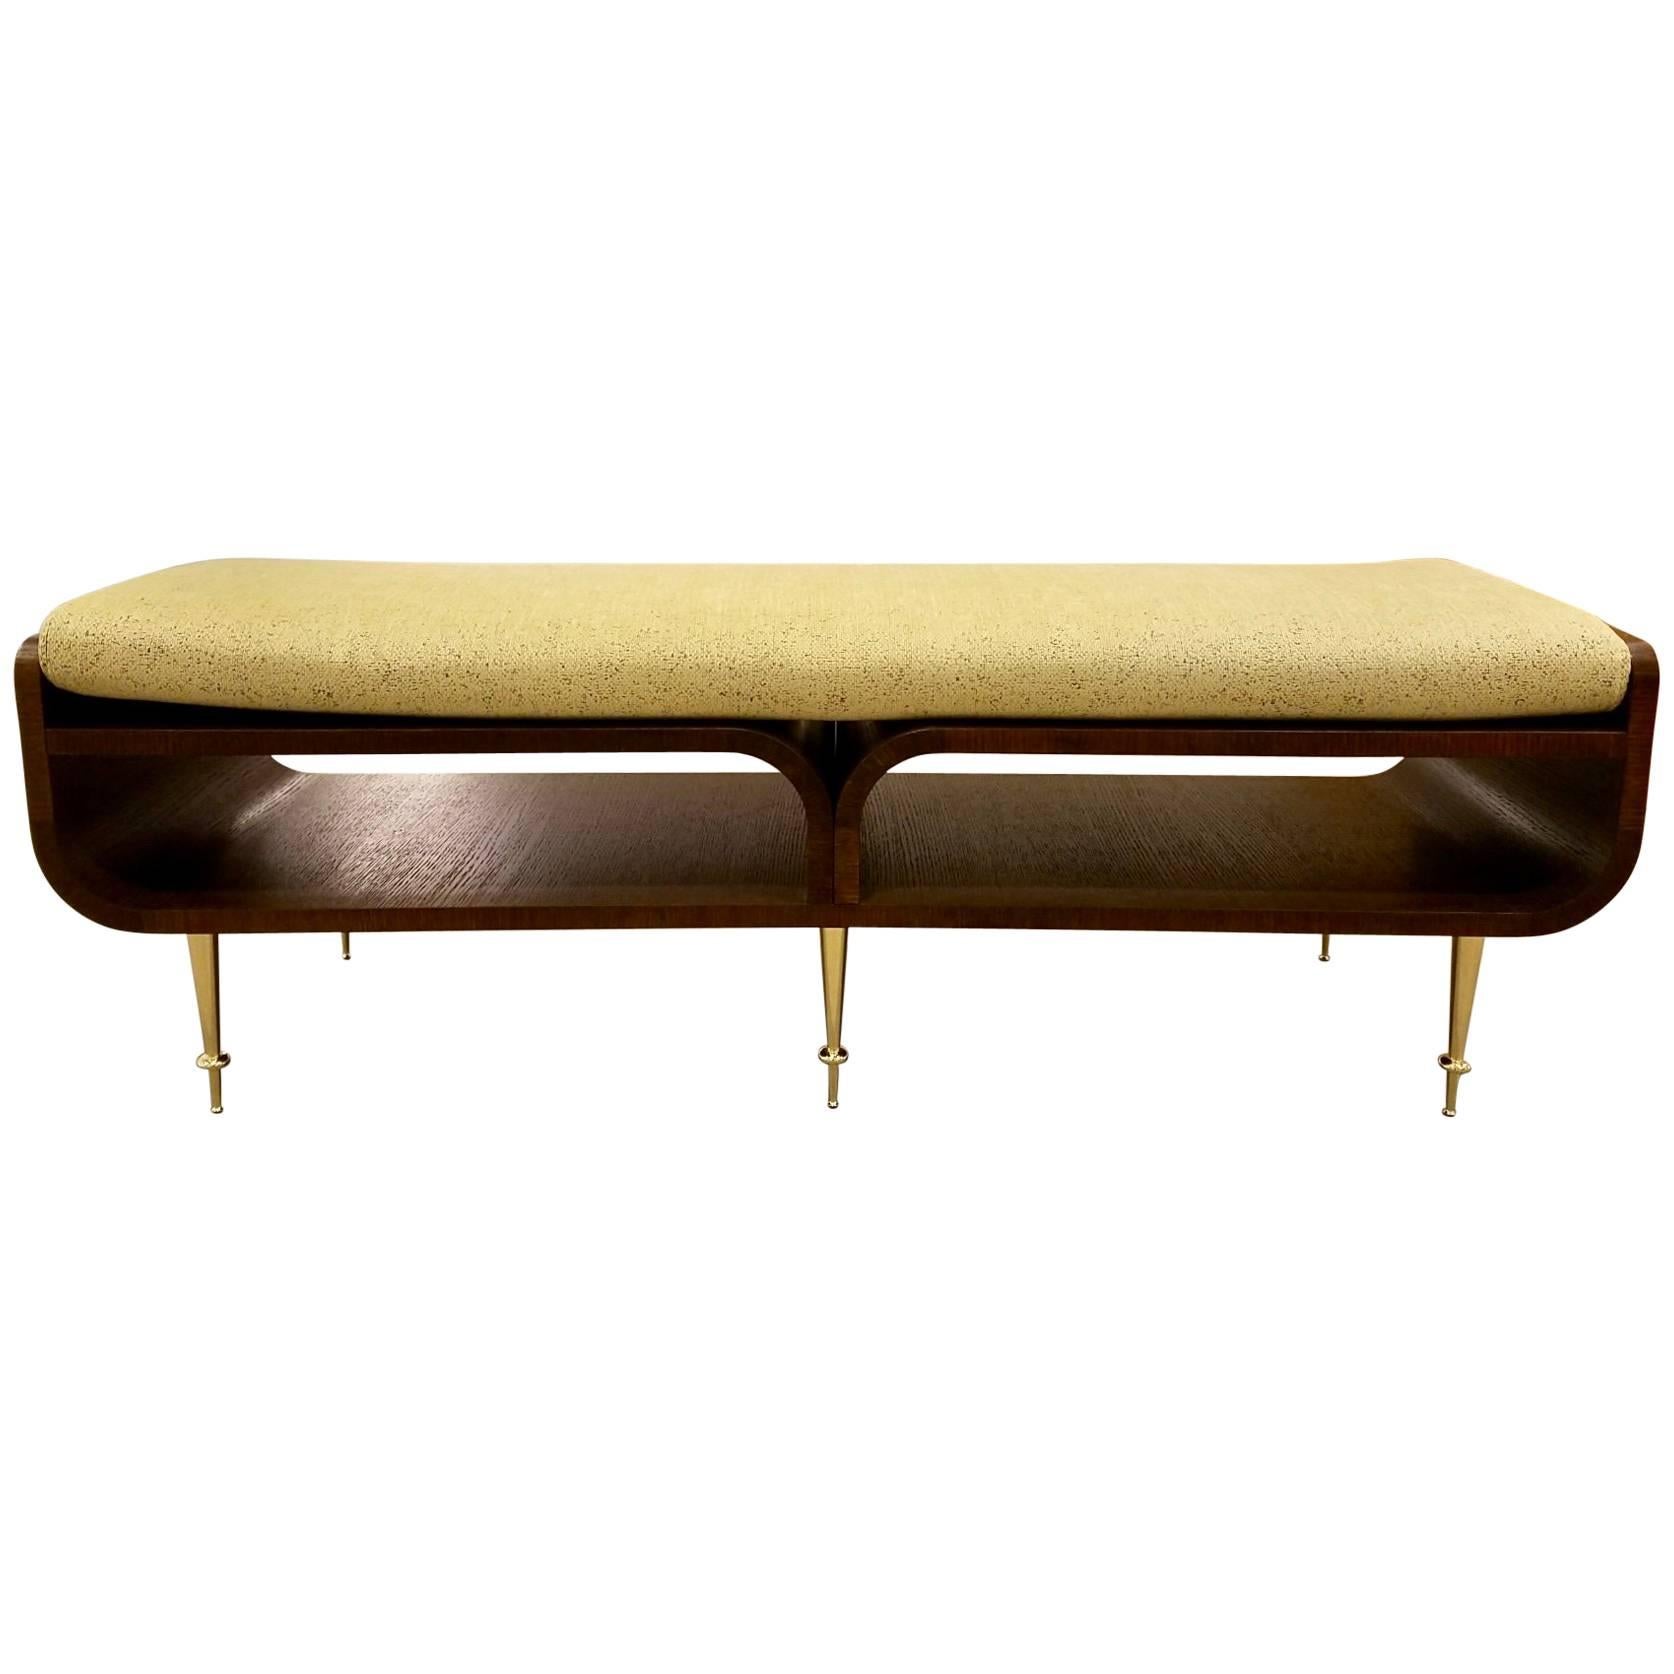 Limited Edition Italian Two-Tier Brown Wood Bench With Brass Legs For Sale